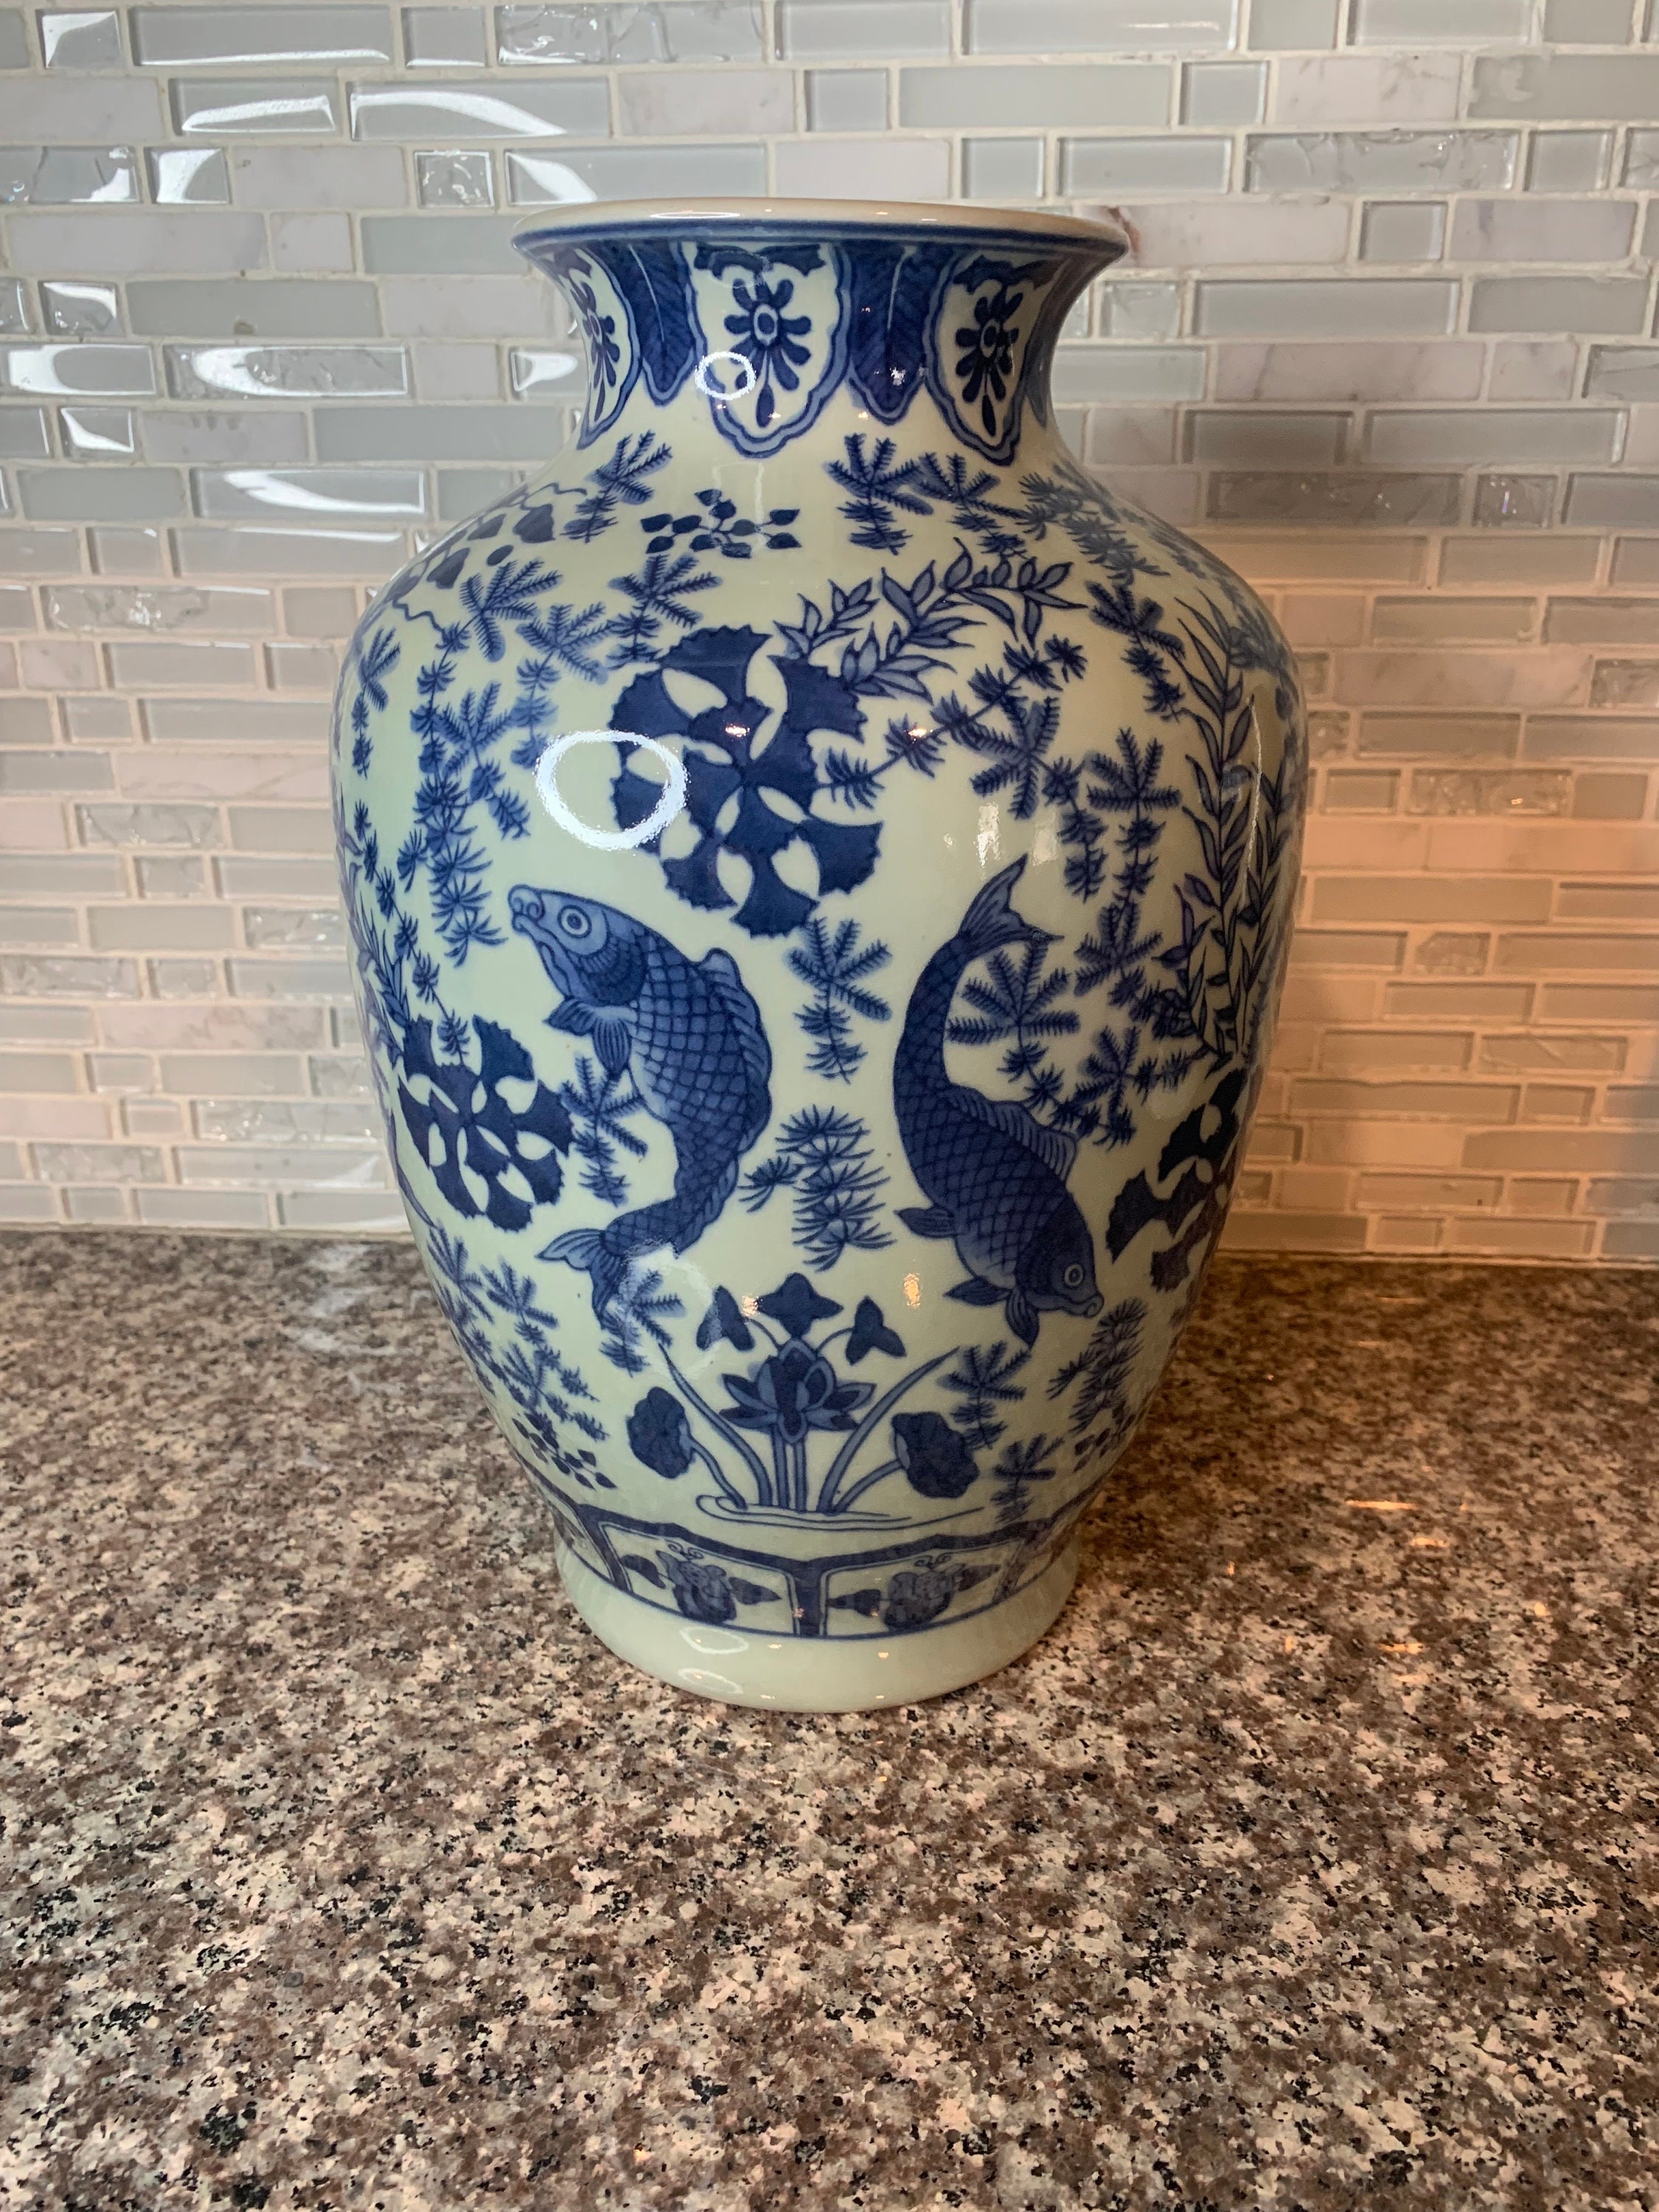 Pier 1 Imports Blue and White Porcelain Vase 153-9195 | Sturgeon | Fish |  Flowers | Chinoiserie | Blue and White | Heavy 